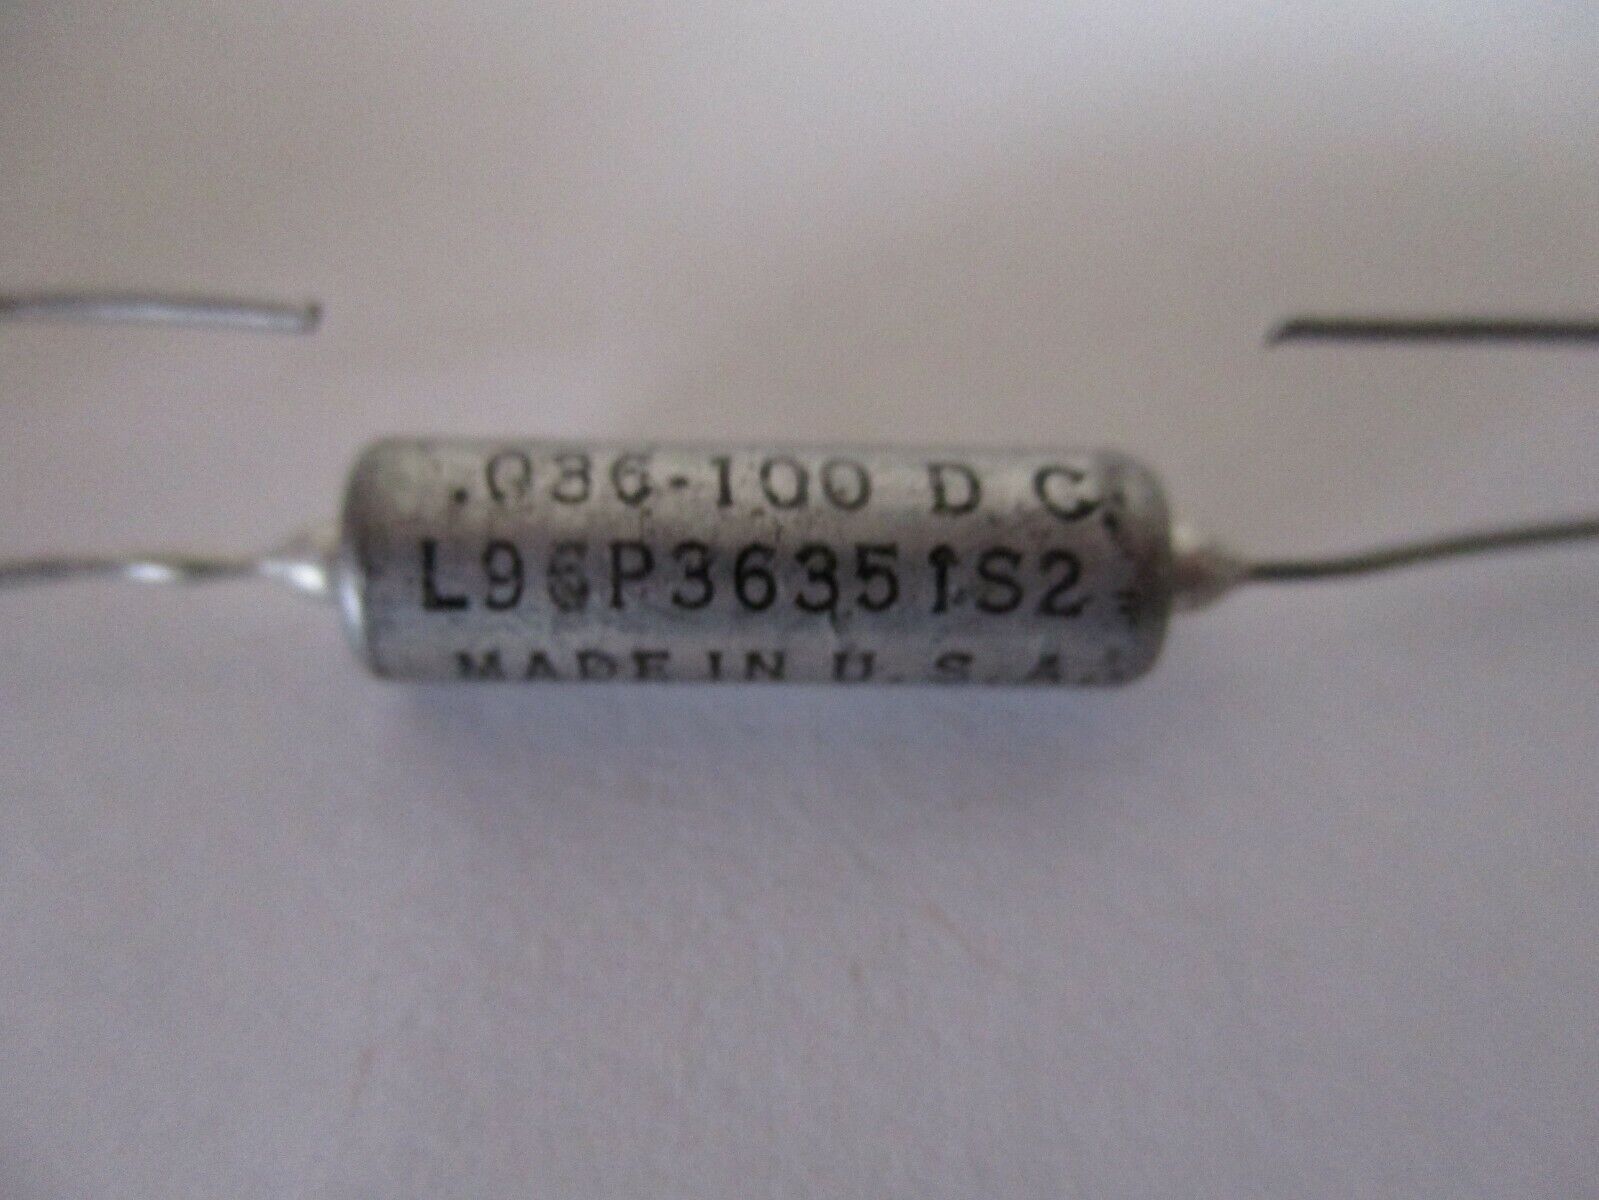 Spague Vitamin Q 0.36 100V Capacitor Paper Dielectric Fixed L96P36351S2 